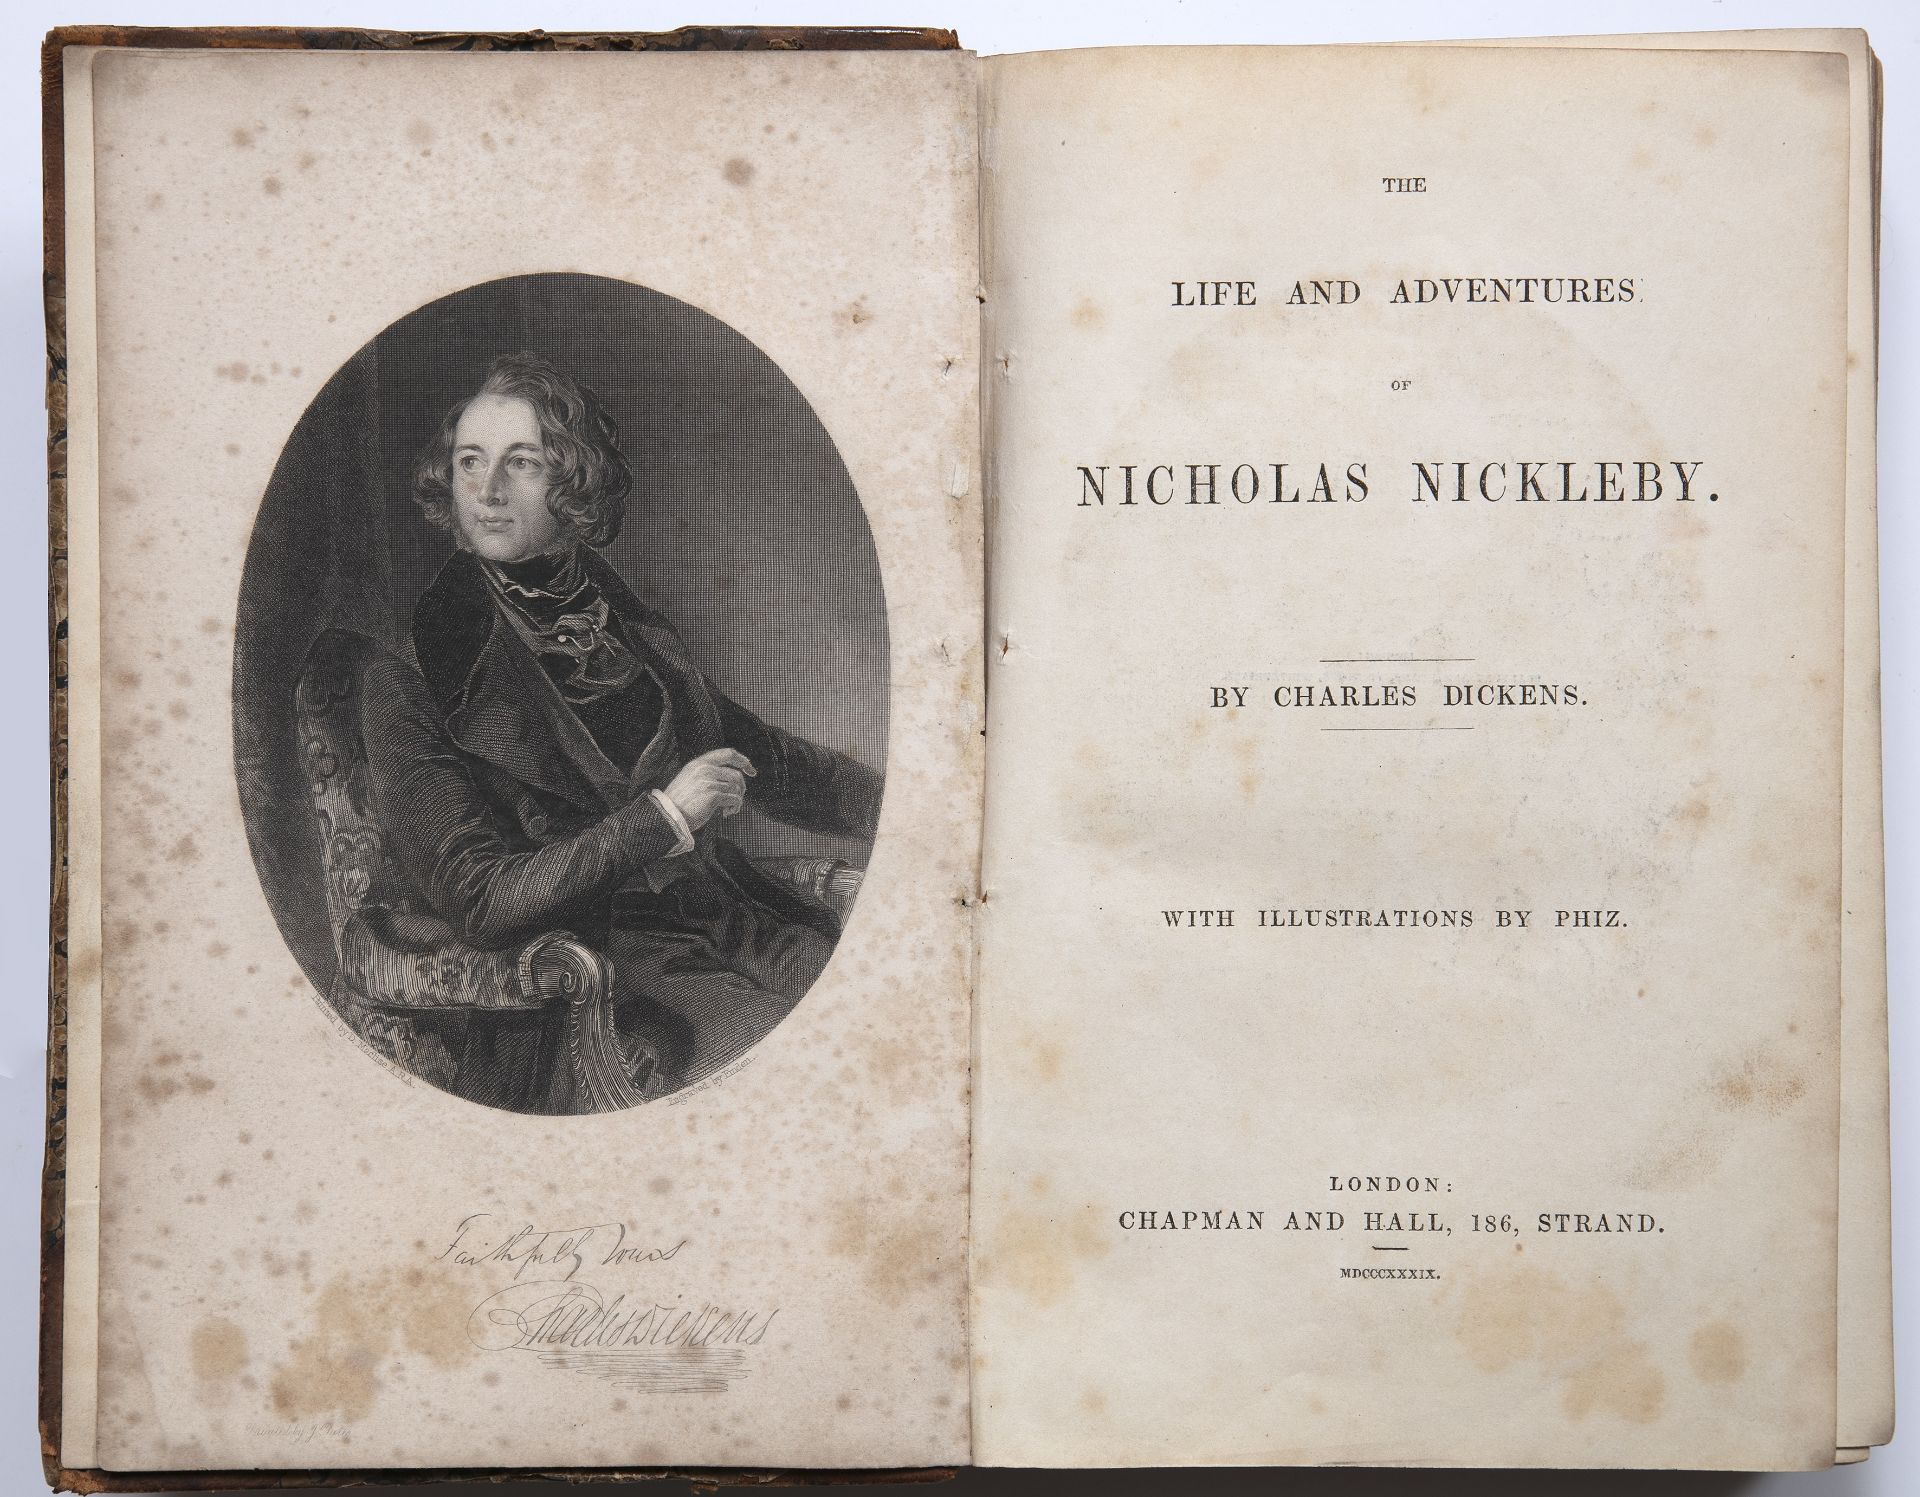 Dickens (Charles) 'The Life and Adventures of Nicholas Nickelby' 1st Ed. Chapman and Hall, London - Image 2 of 2